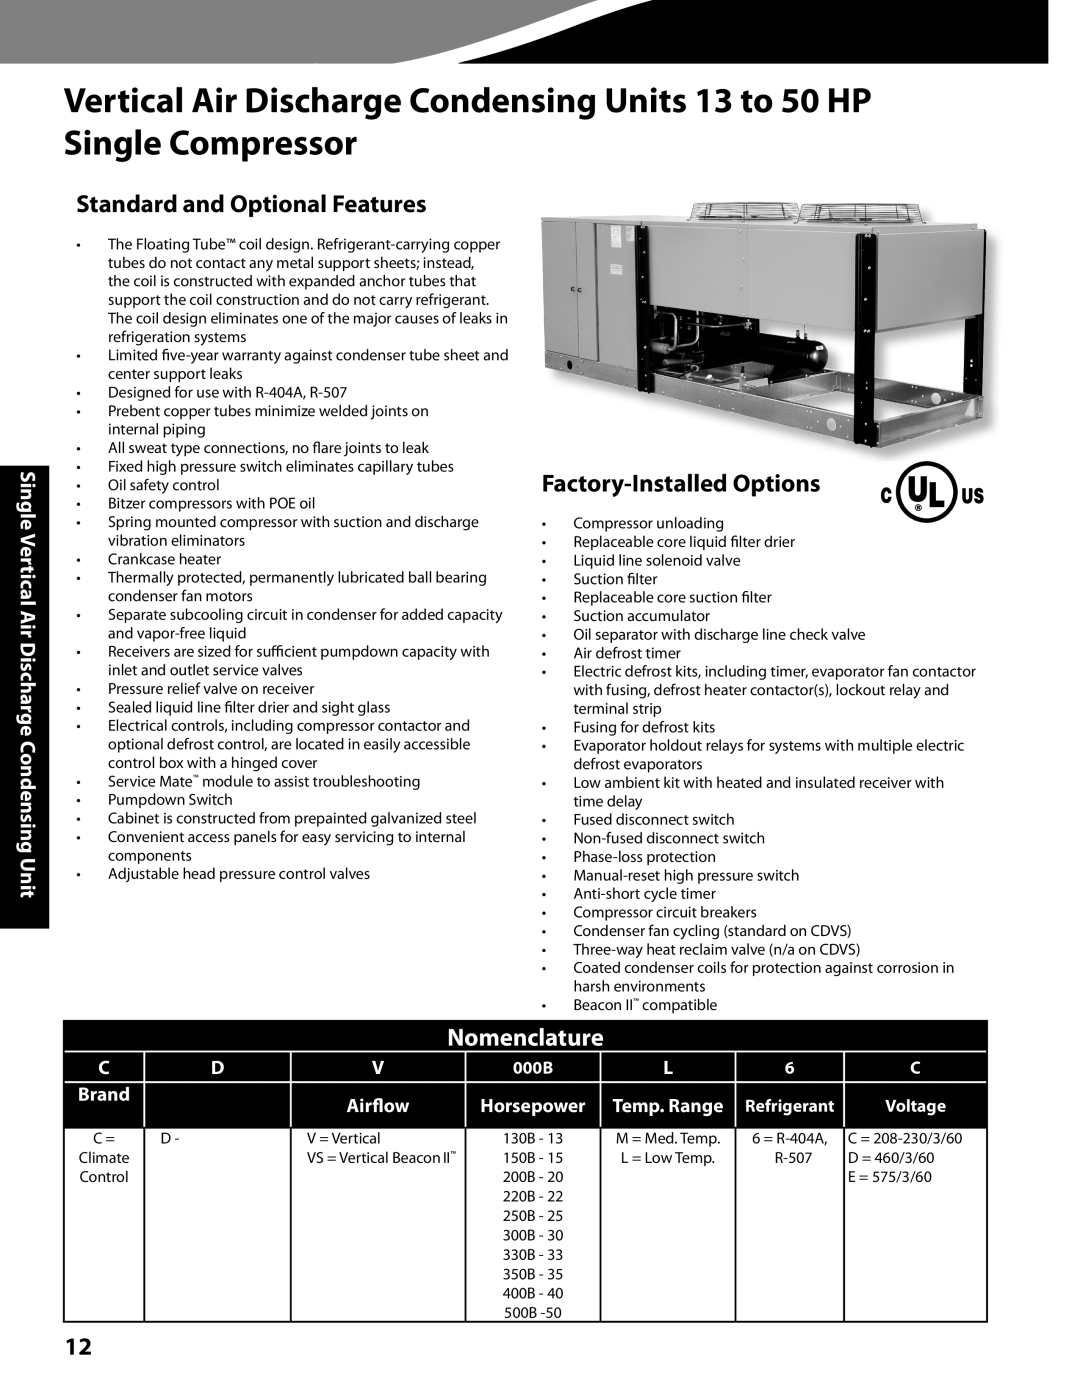 Heatcraft Refrigeration Products CC-CUBZTB Standard and Optional Features, Factory-InstalledOptions, Nomenclature, 000B 